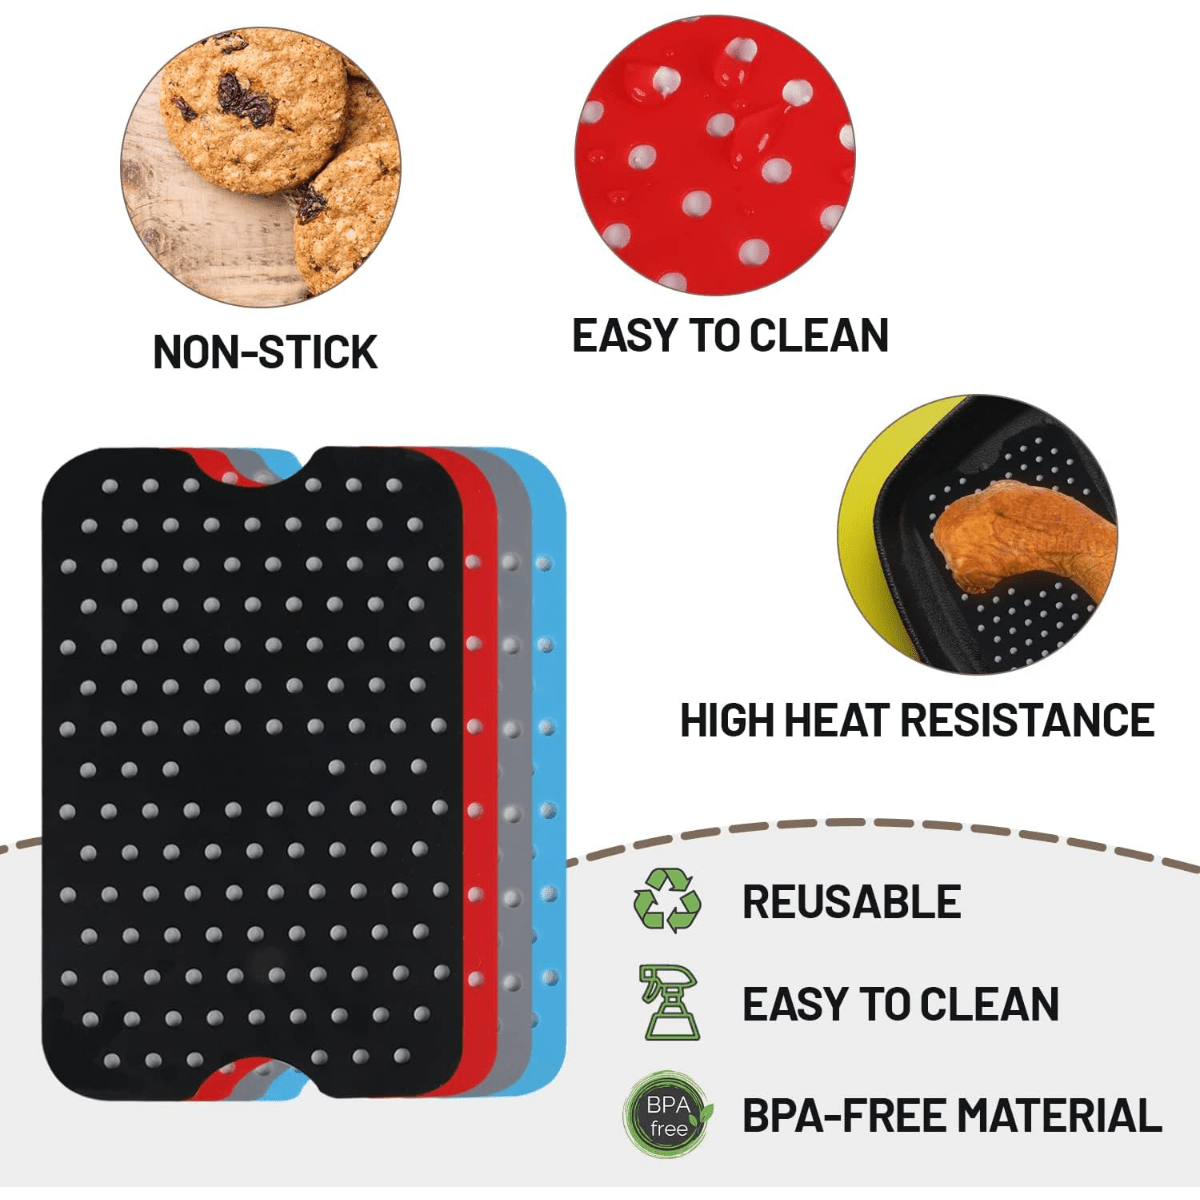 Double Basket Air Fryers Liners Air Fryer Liners For Ninja Dual Silicone Air  Fryer Accessories For Ninja Foodi No Stick Square Mat Kitchen Dual Air Fryer  Baking Steamer Reusable Air Fryer Accessories 